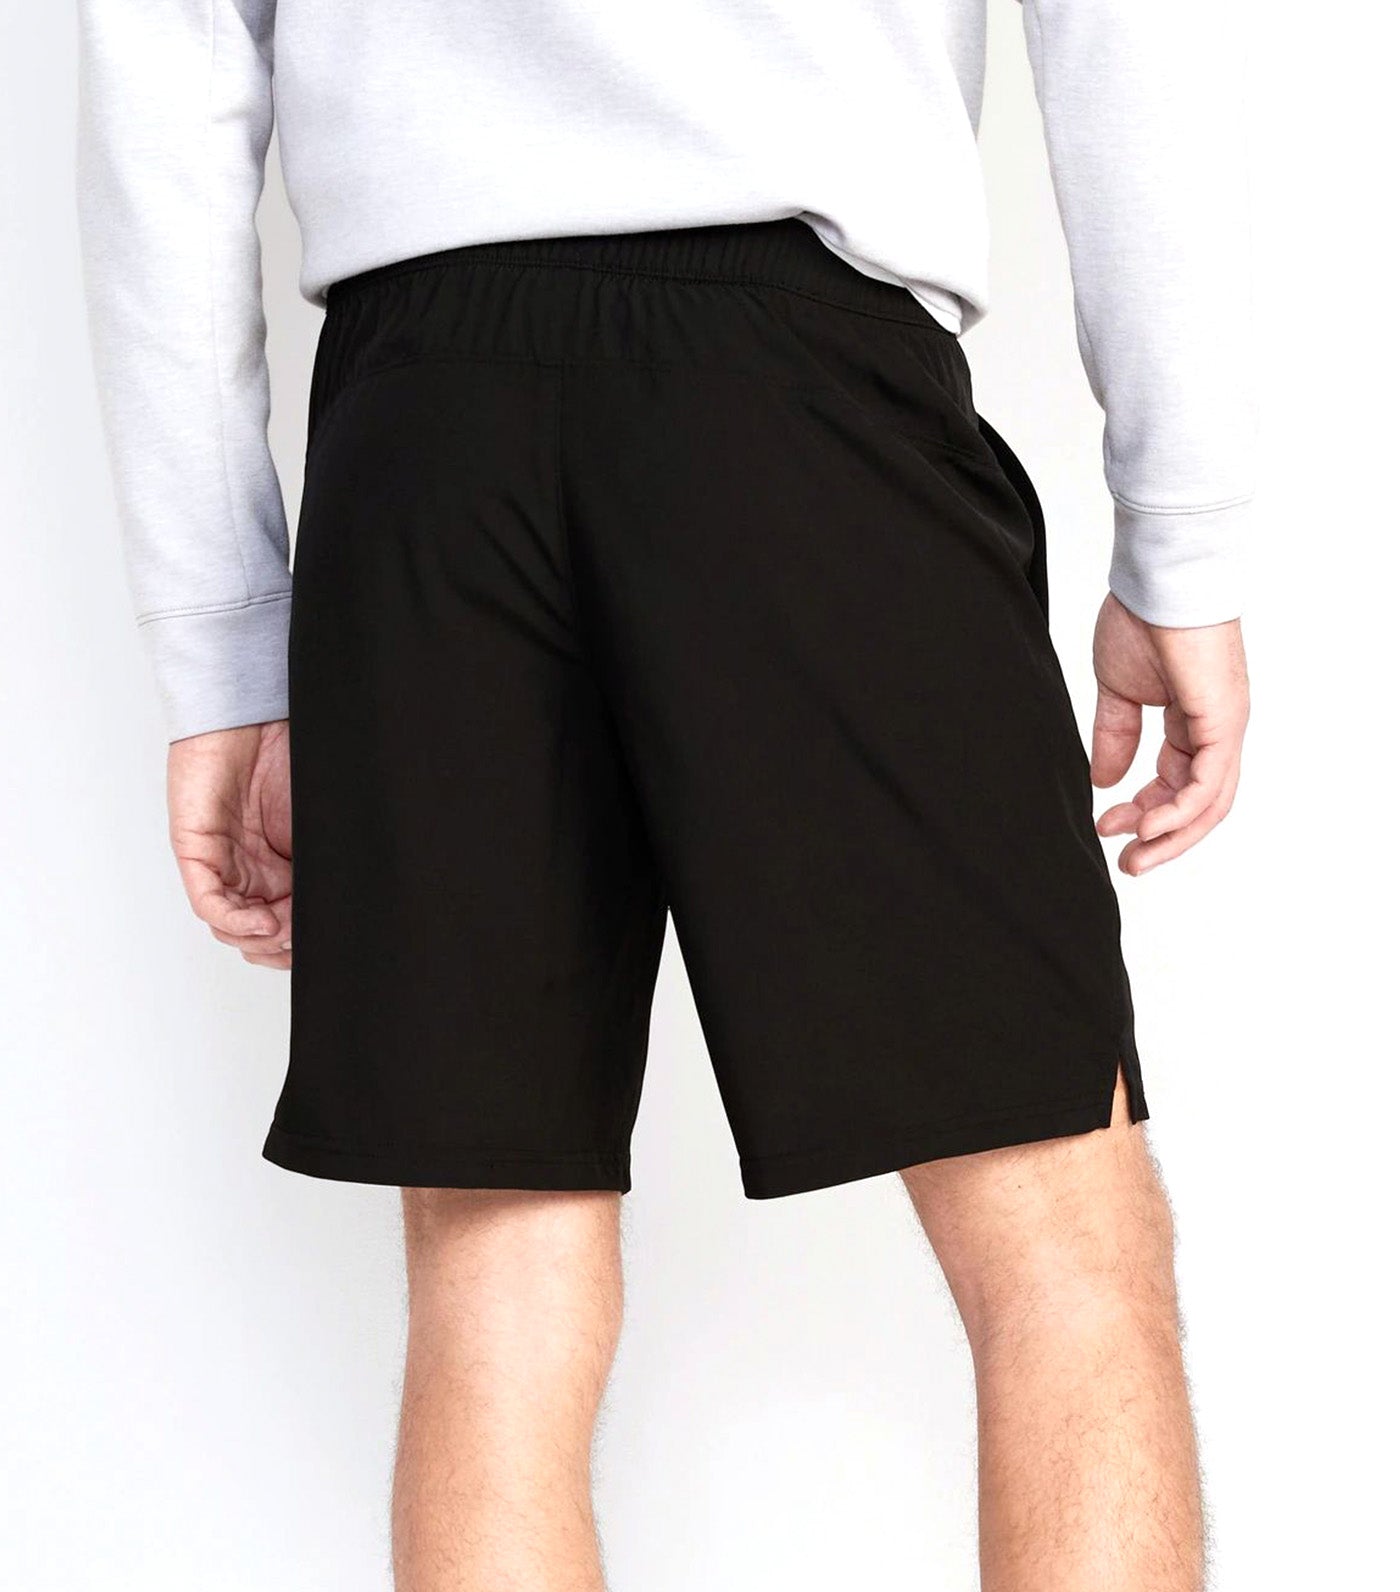 Essential Woven Workout Shorts for Men 9-inch Inseam Black Jack